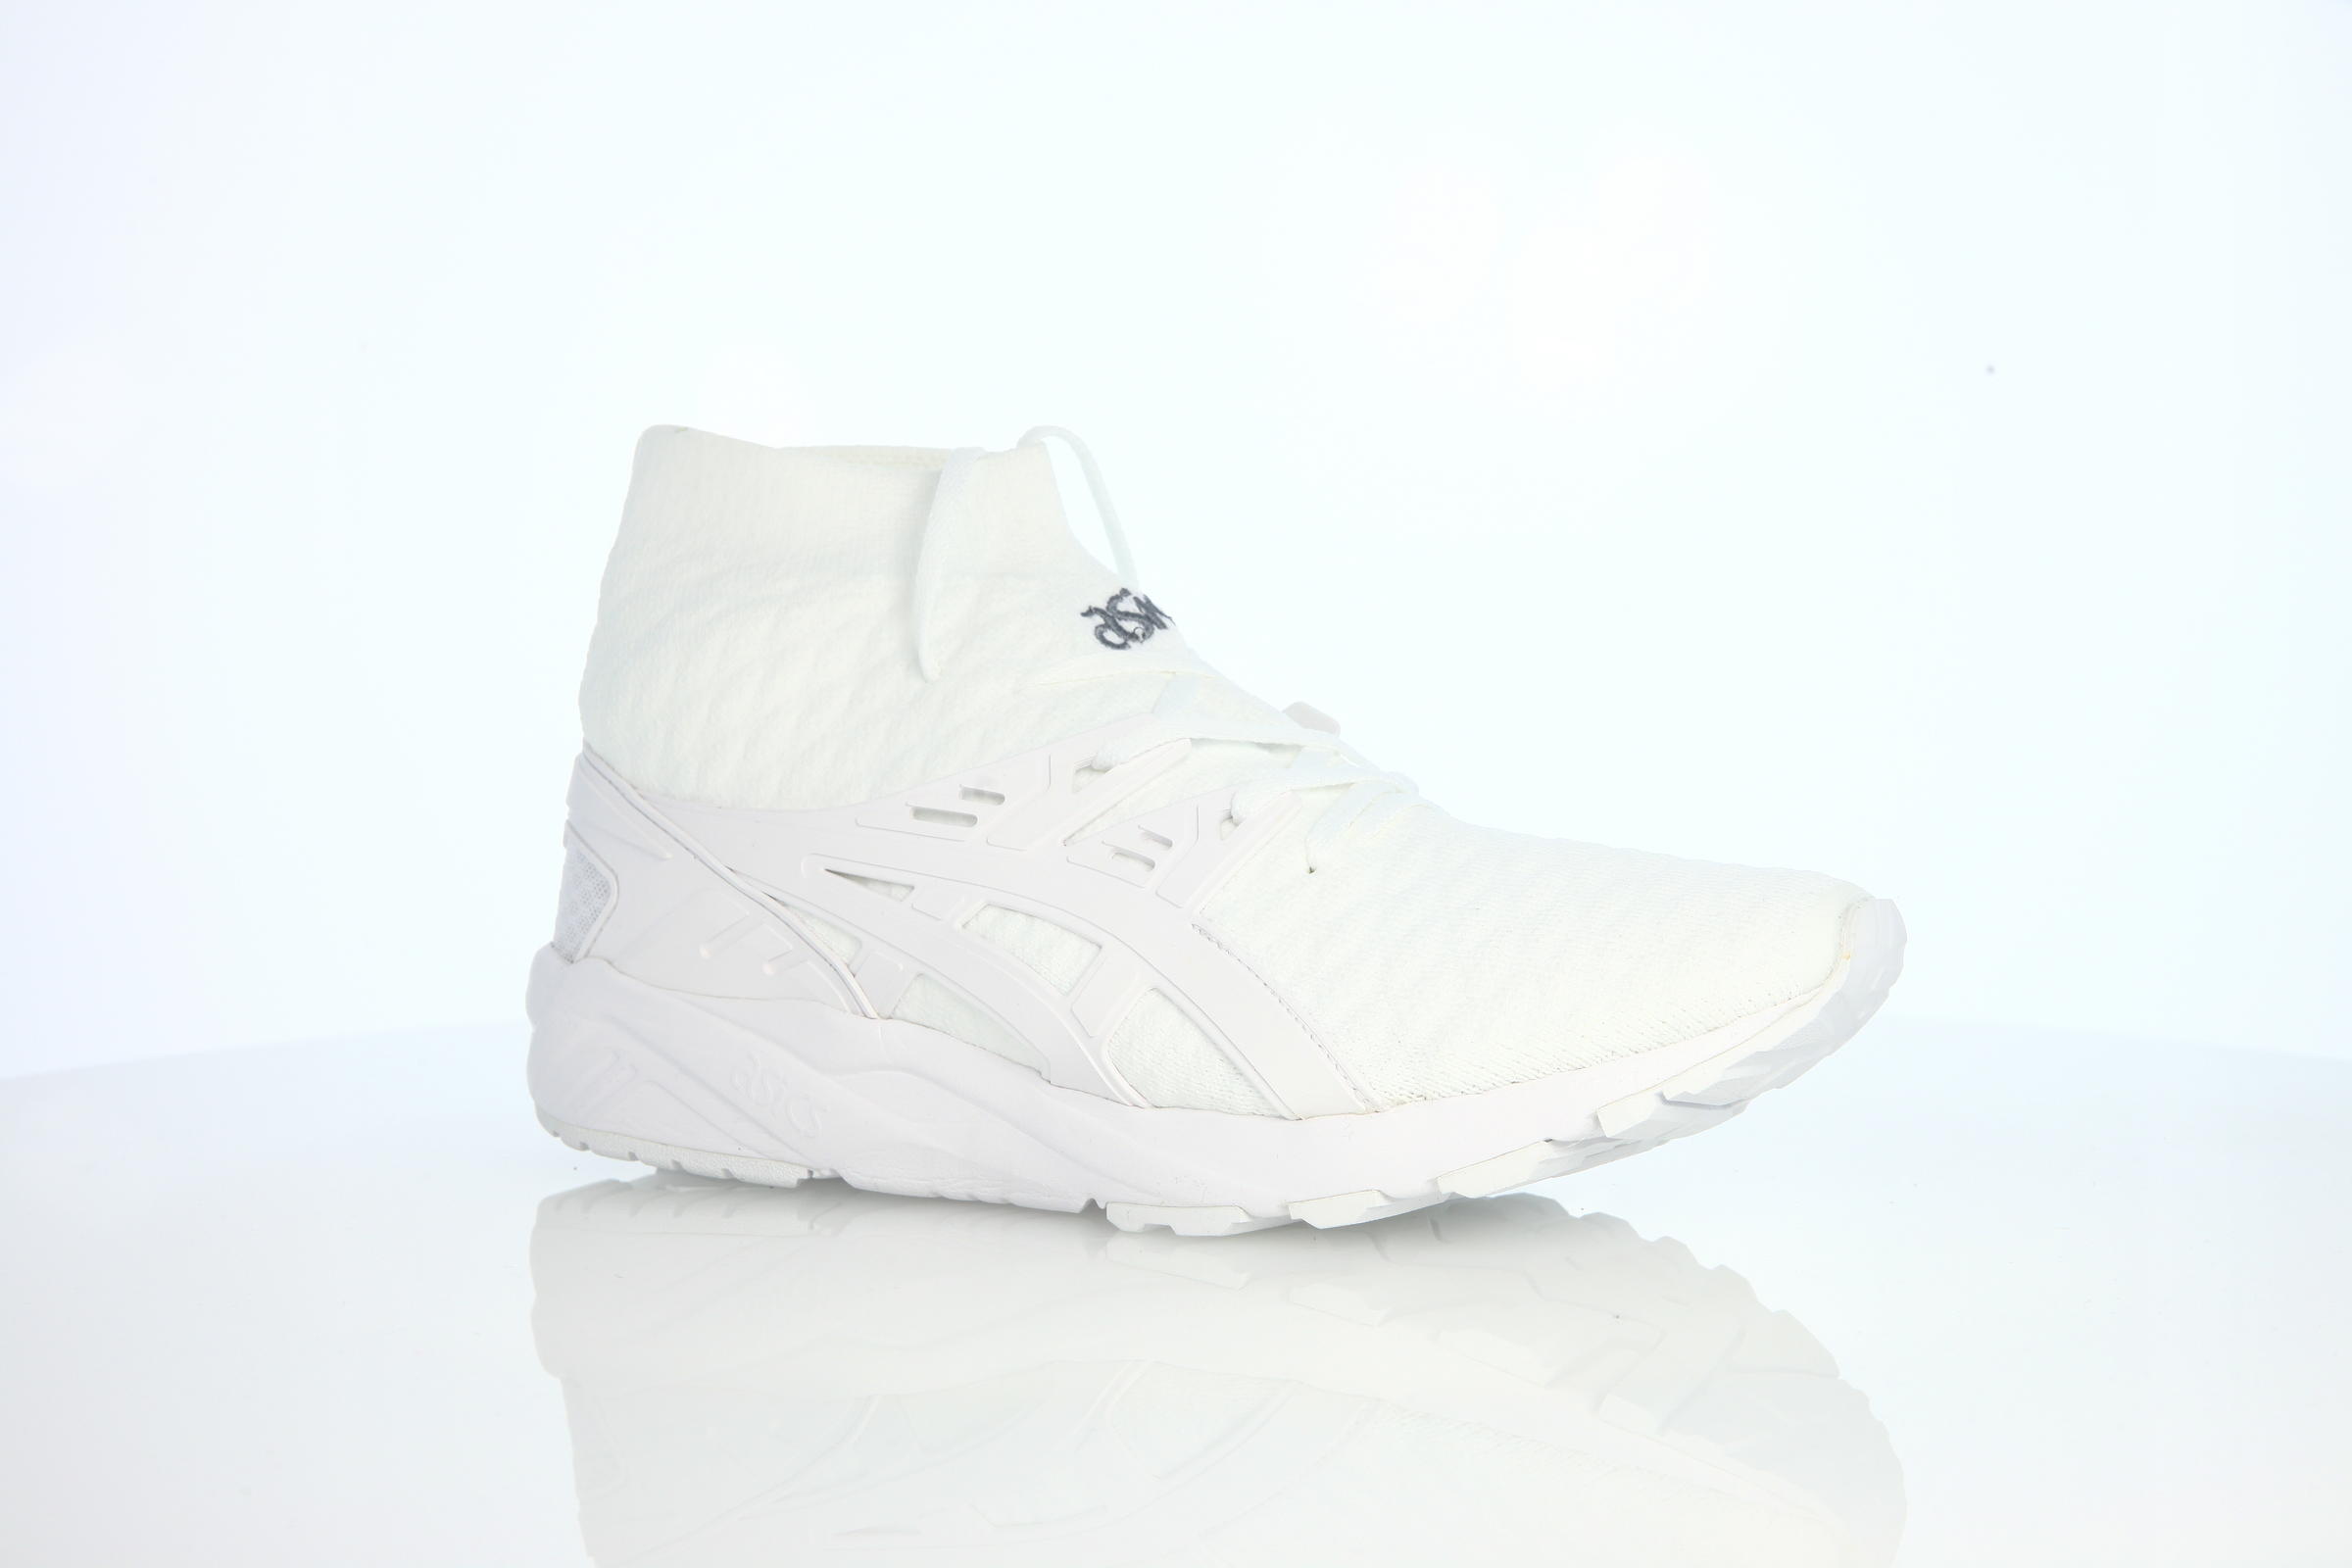 Asics Gel-Kayano Trainer Evo One Piece Knit Pack "All White"